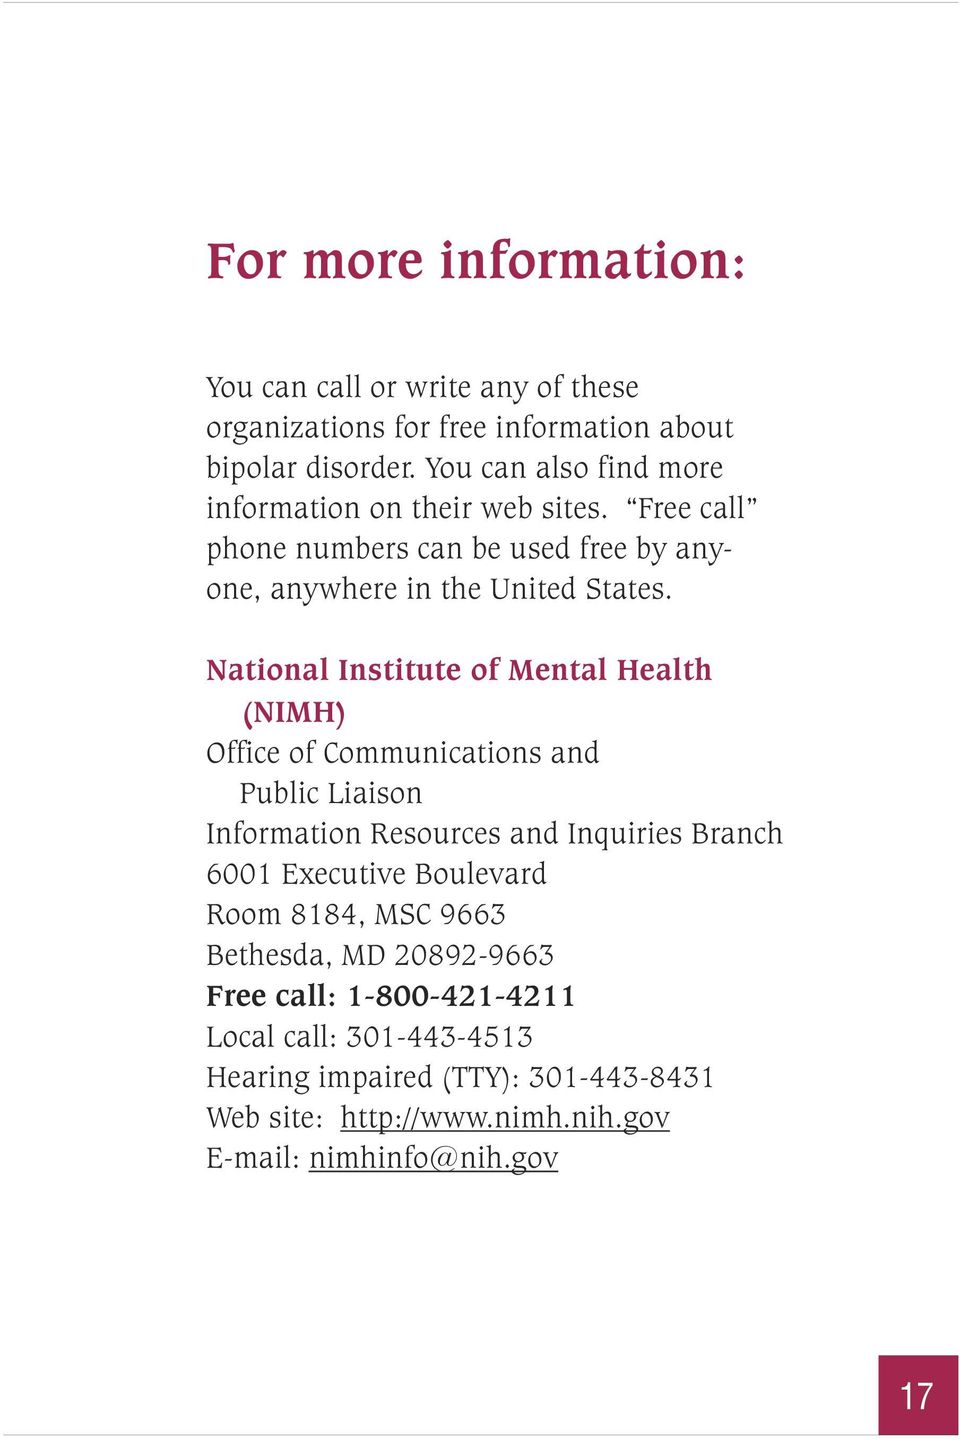 National Institute of Mental Health (NIMH) Office of Communications and Public Liaison Information Resources and Inquiries Branch 6001 Executive